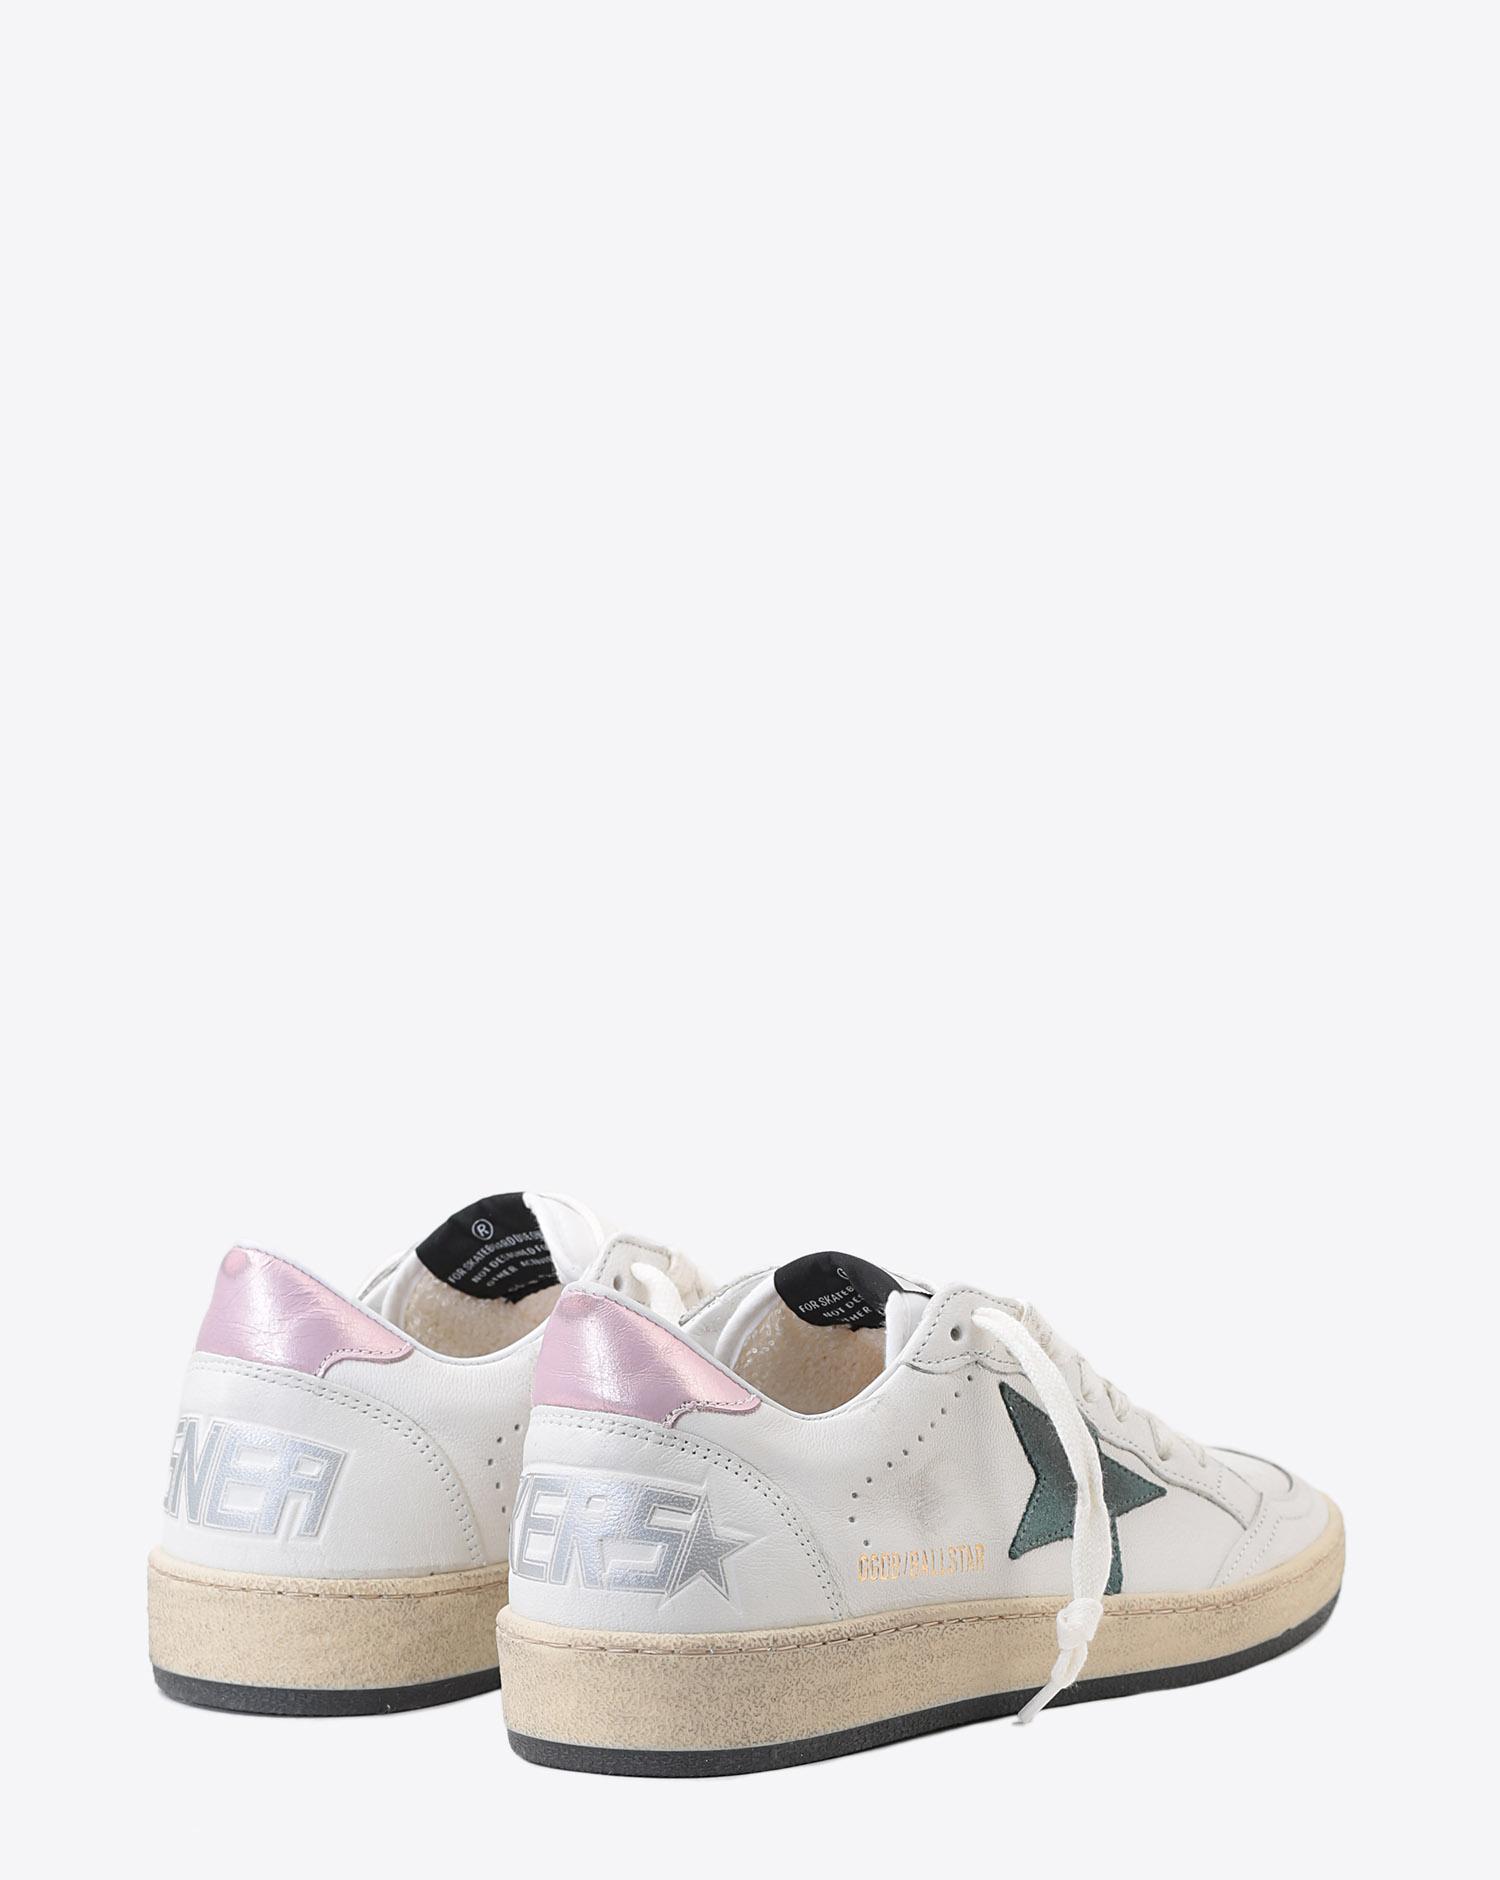 Golden Goose Woman Pré-Collection Sneakers Ball Star - White- Pink Laminated - Green Star   